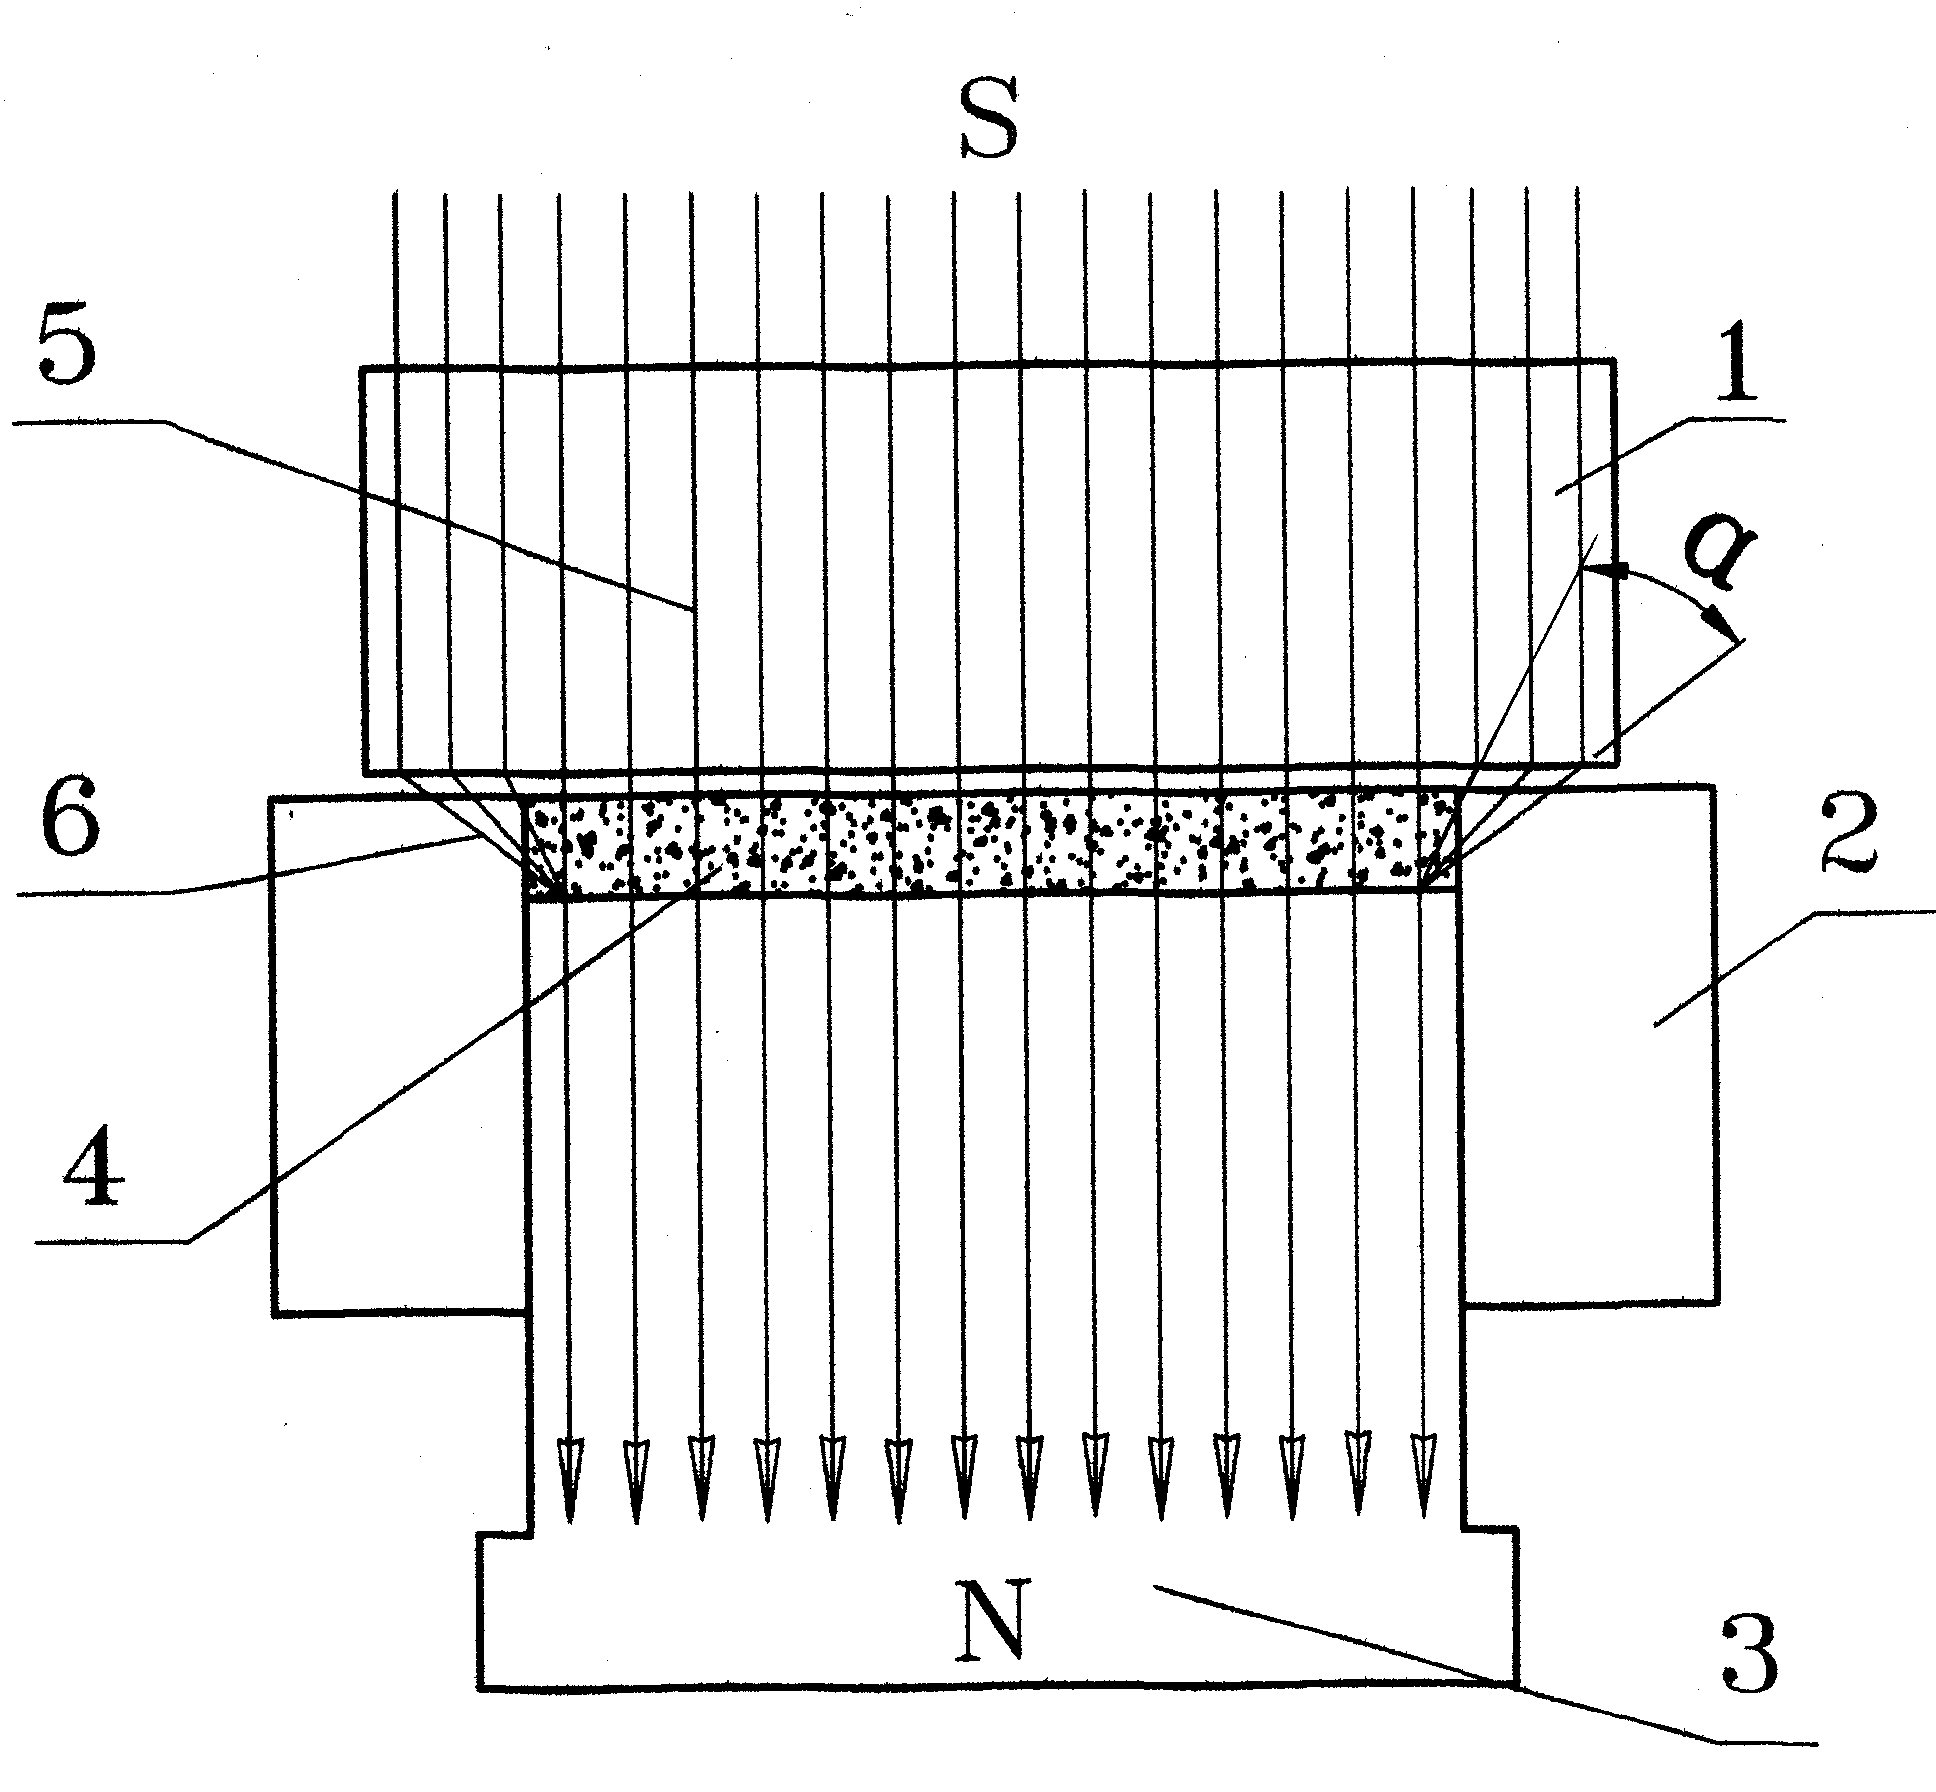 Mold for rectifying deformation of permanent magnetic ferrite product